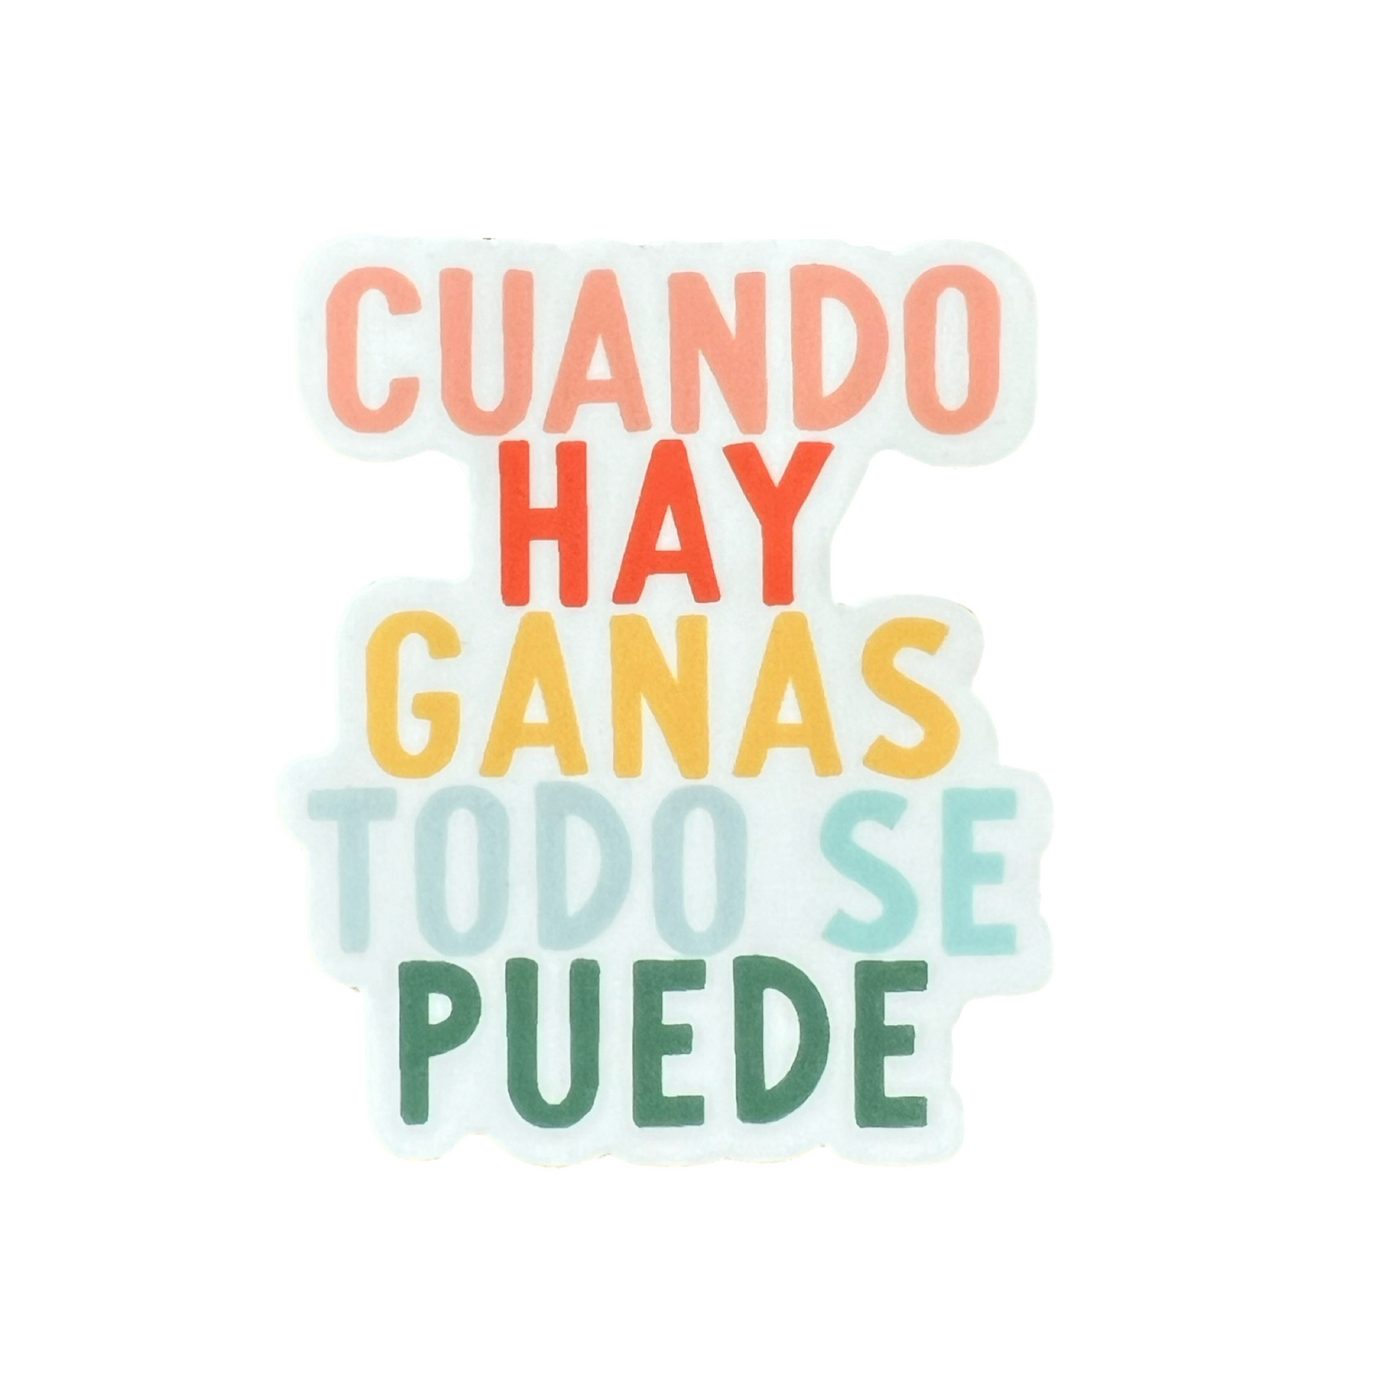 white background sticker with the phrase Cuando Hay Ganas Todo Se Puede in multi-colored lettering such as light blue, yellow, orange, coral and green.